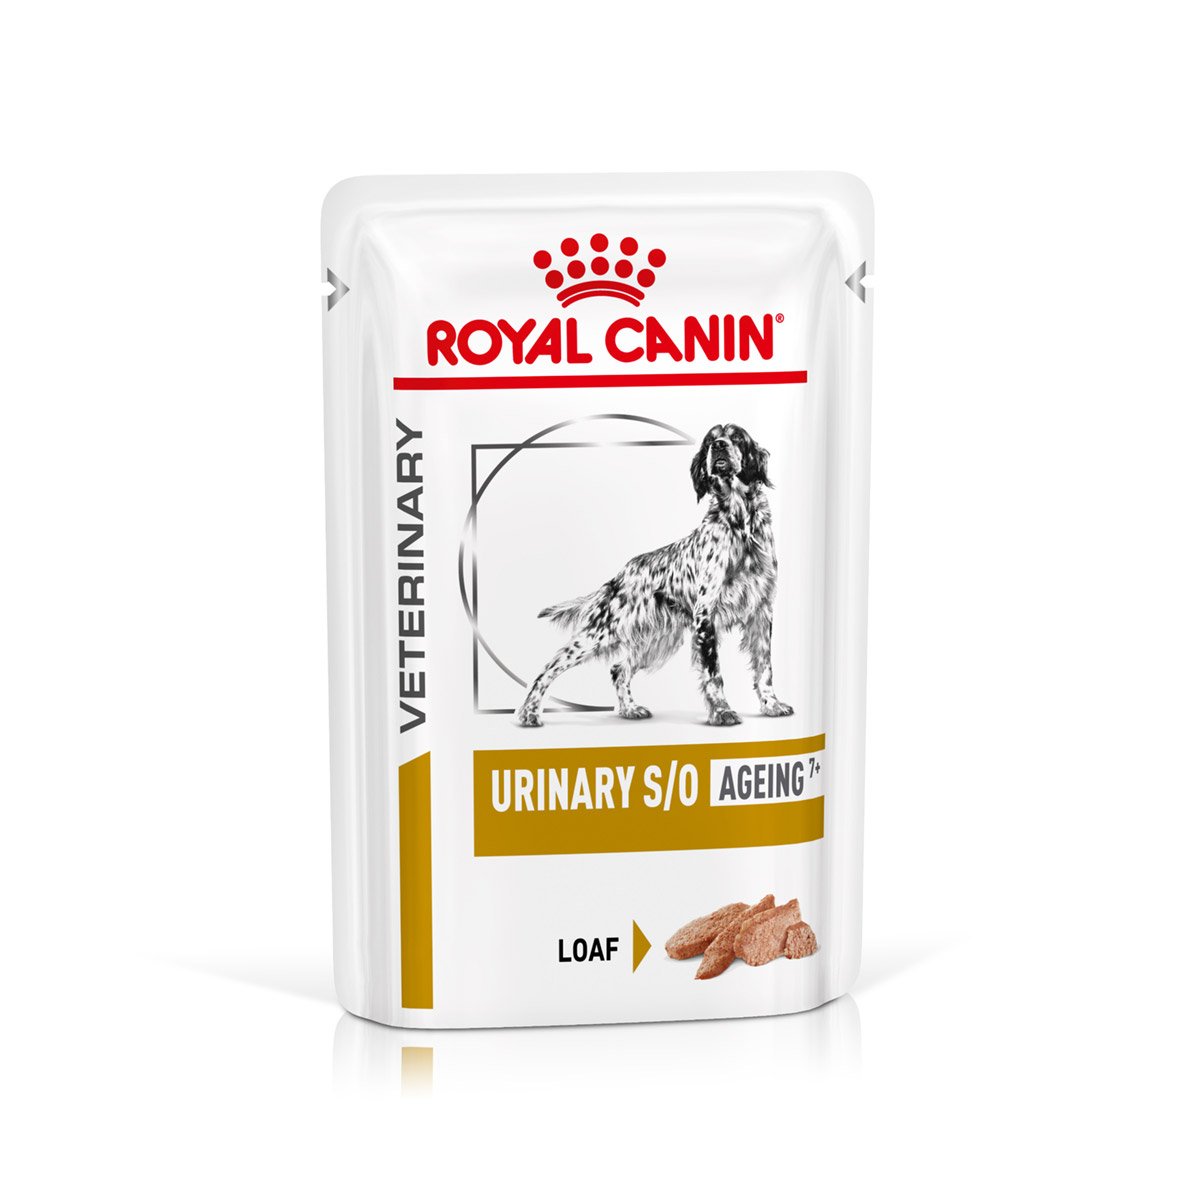 ROYAL CANIN® Veterinary URINARY S/O Ageing 7+ Nassfutter für Hunde 12x85g von Royal Canin